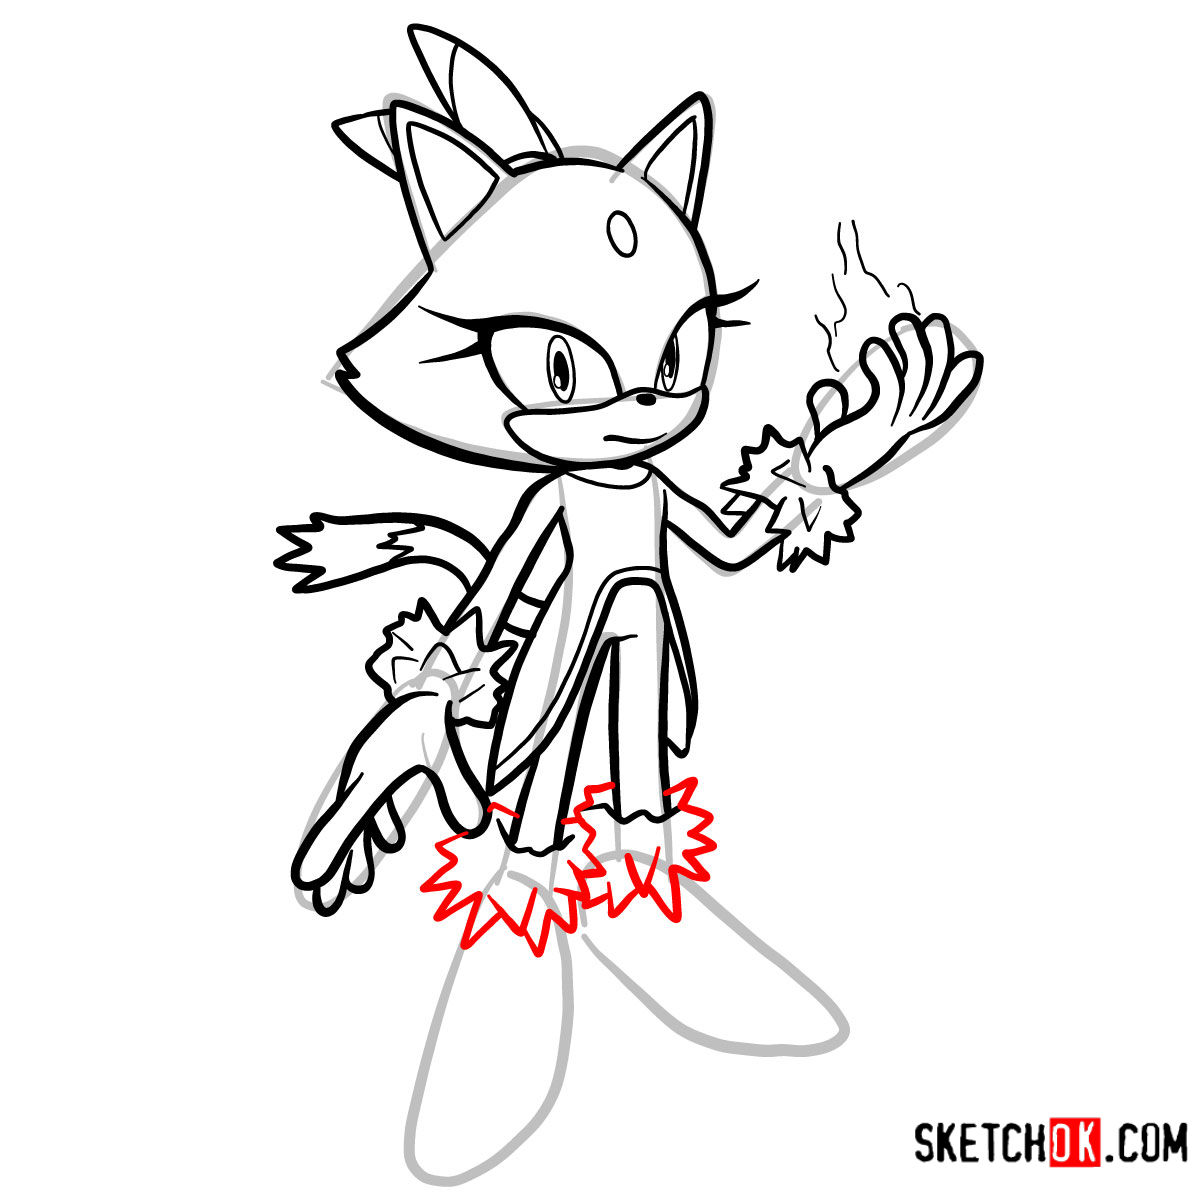 How to draw Blaze the Cat | Sonic the Hedgehog - step 10